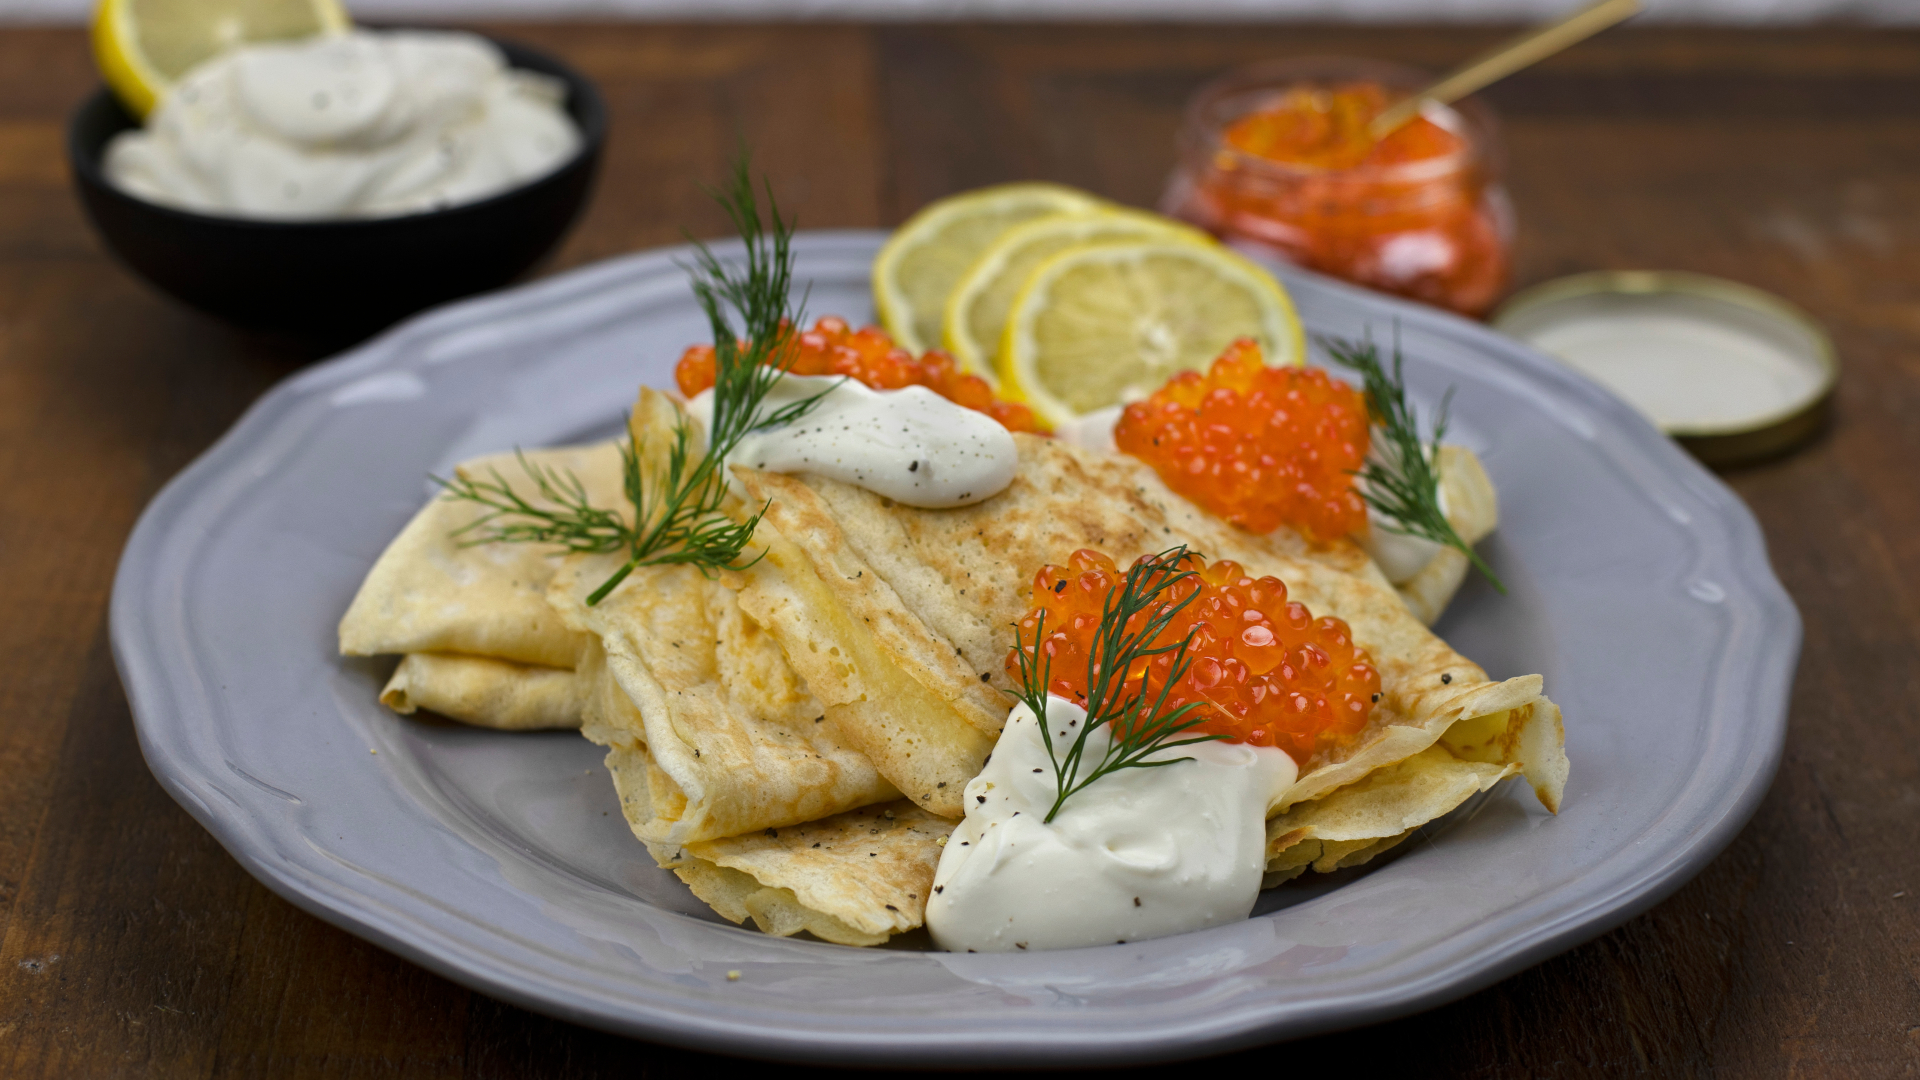 Russian crepes with red caviar